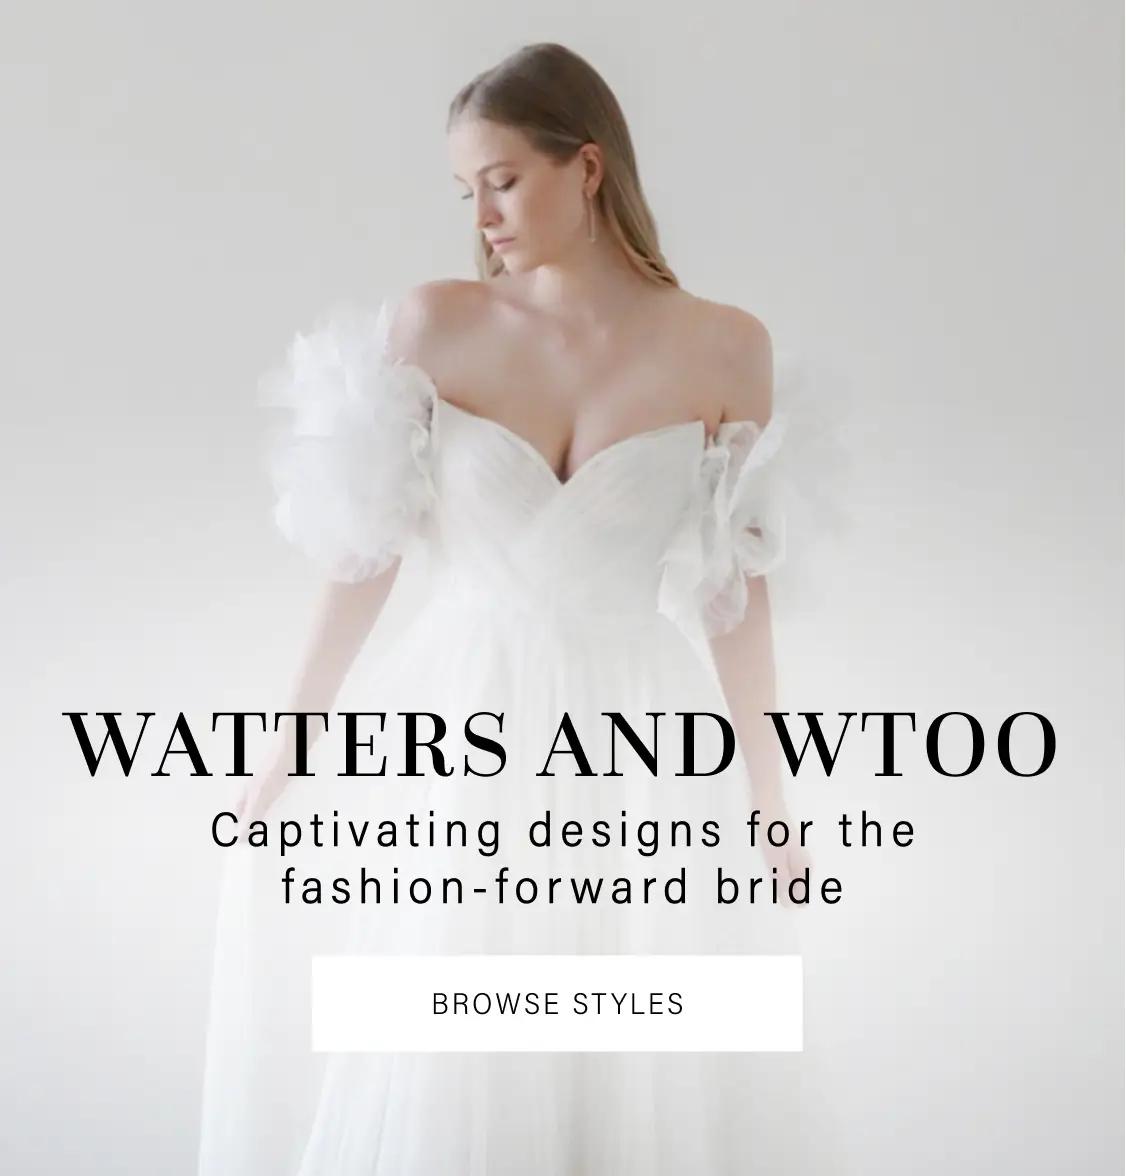 Watters and Wtoo Wedding Dresses at Signature Bridal Salon in Austin, TX